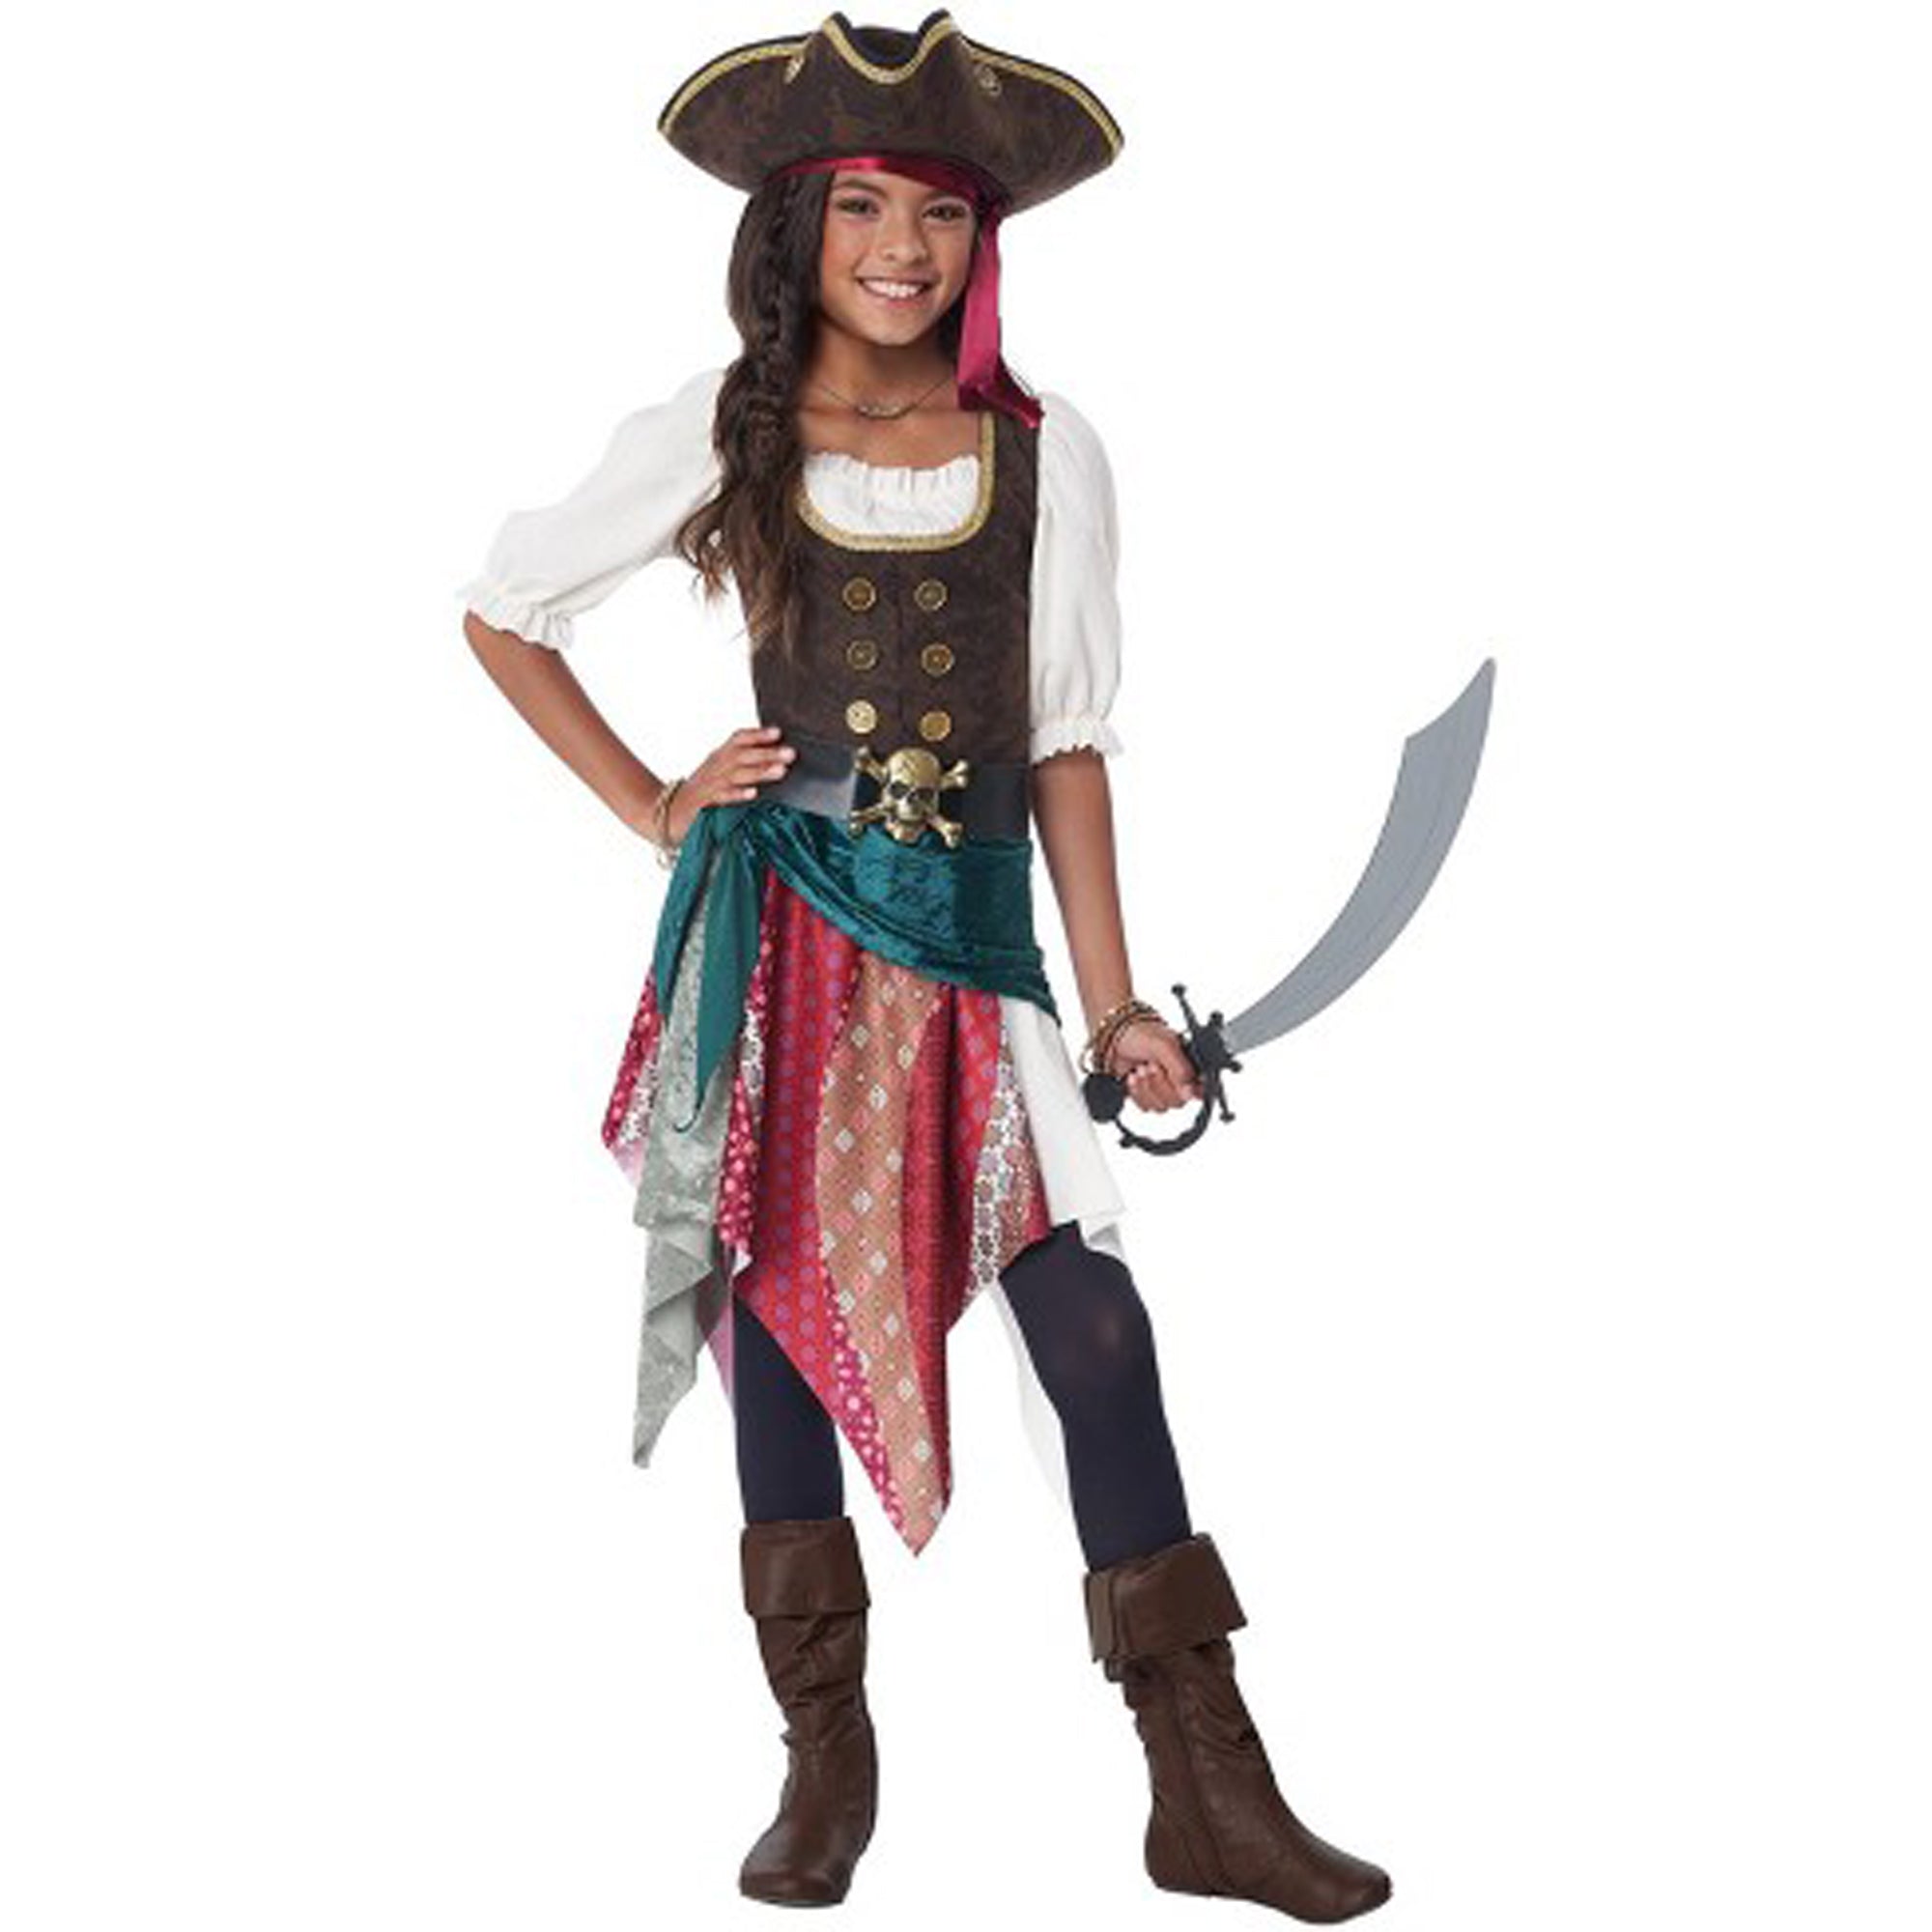 Boho Pirate Costume for Kids, Blue and Red Dress With Vest